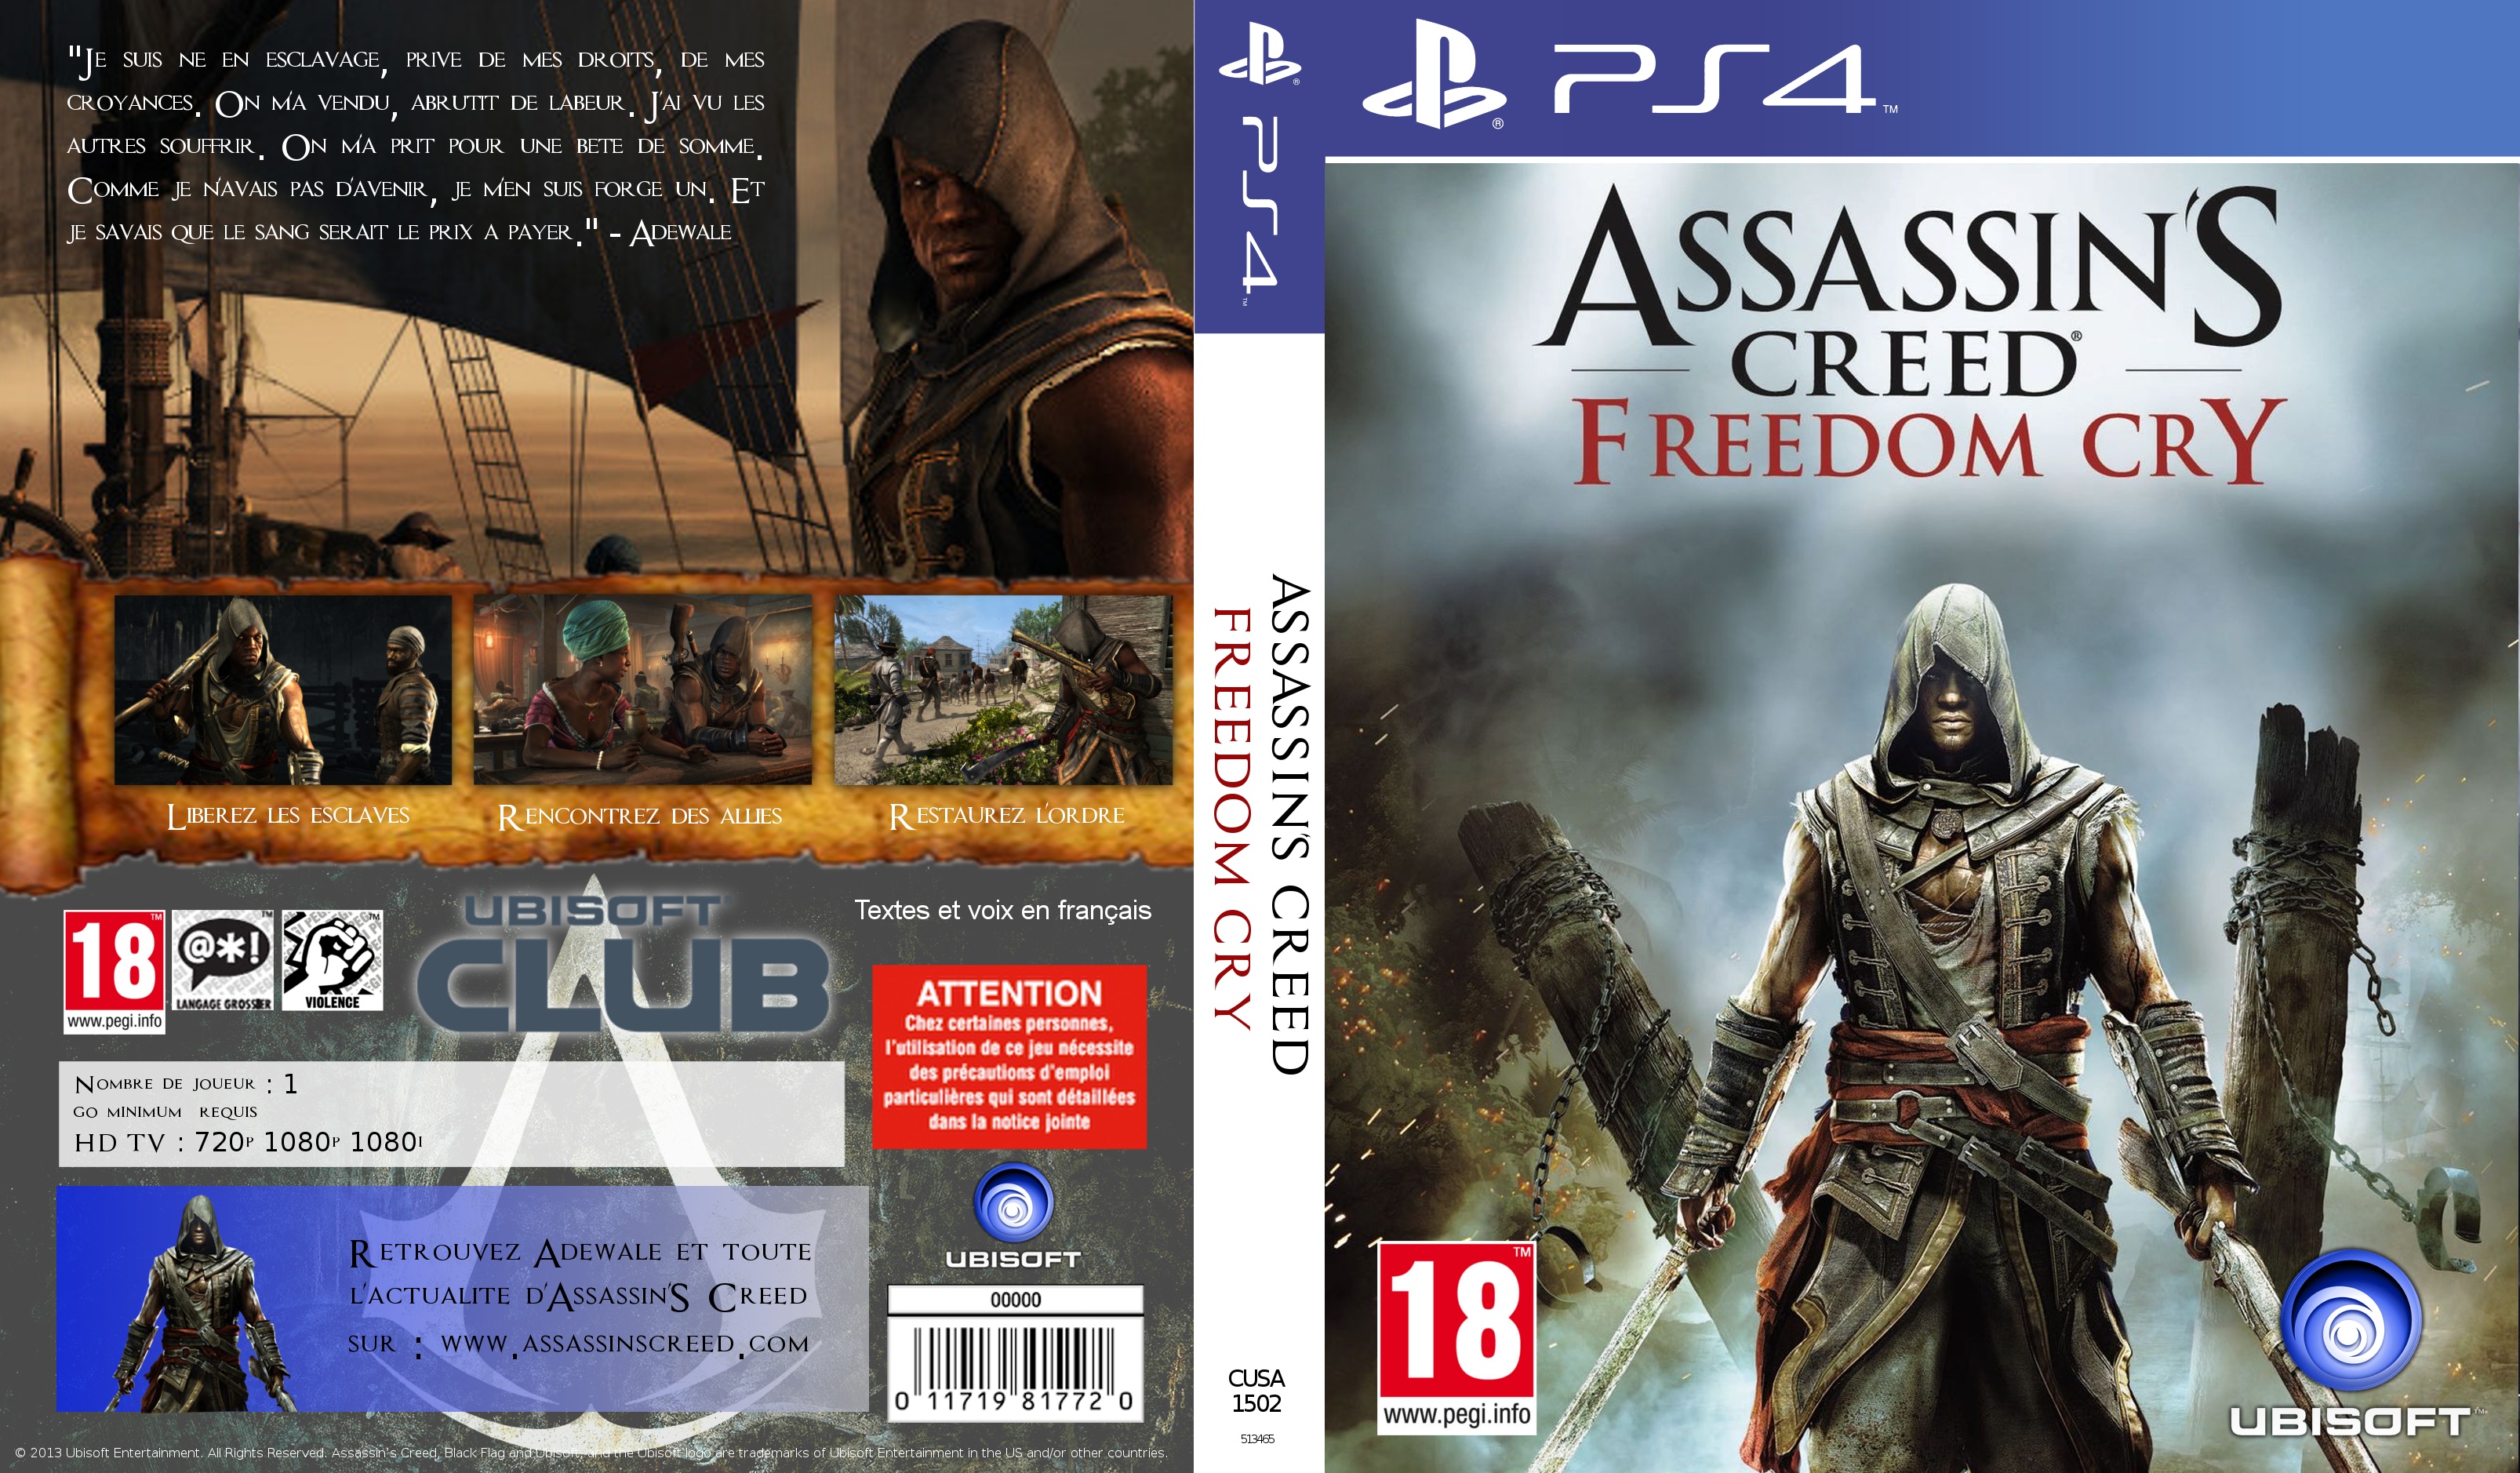 Creed игра ps4. Assassin's Creed 3 диск. Ассасин Крид диск на ПС 4. Плейстейшен 4 диски ассасин Крид. Assassins Creed ps3 обложка.